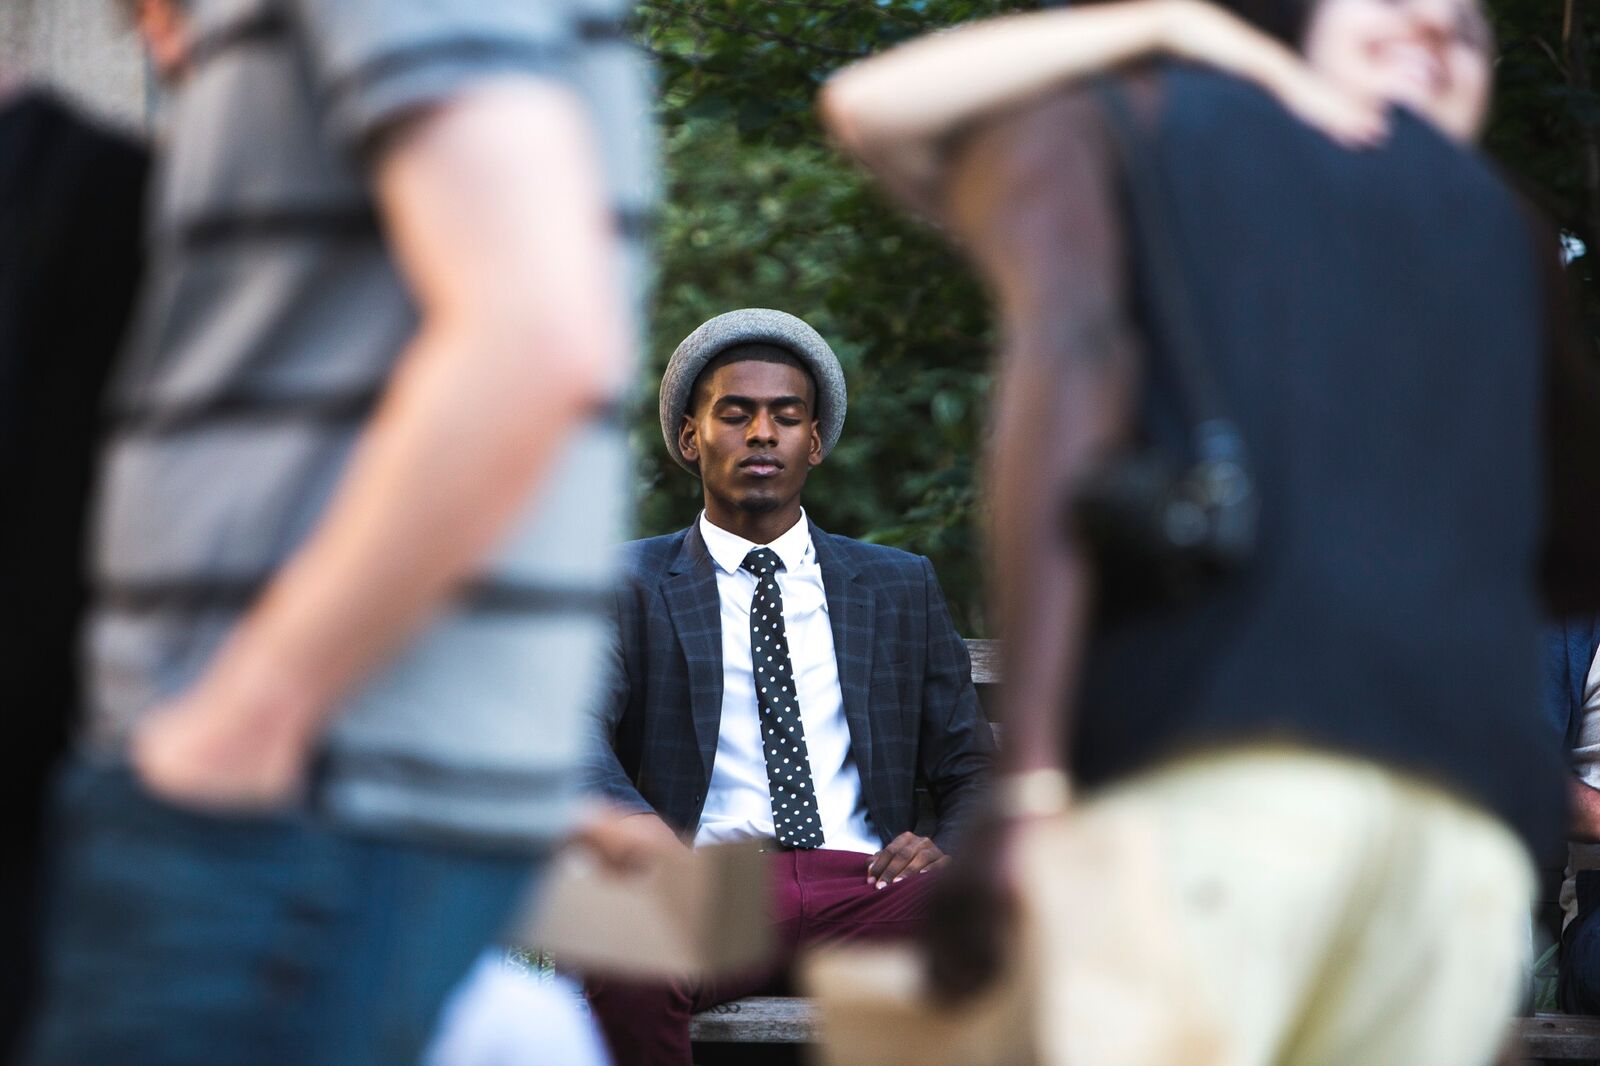 African American man sitting on a bench with eyes closed